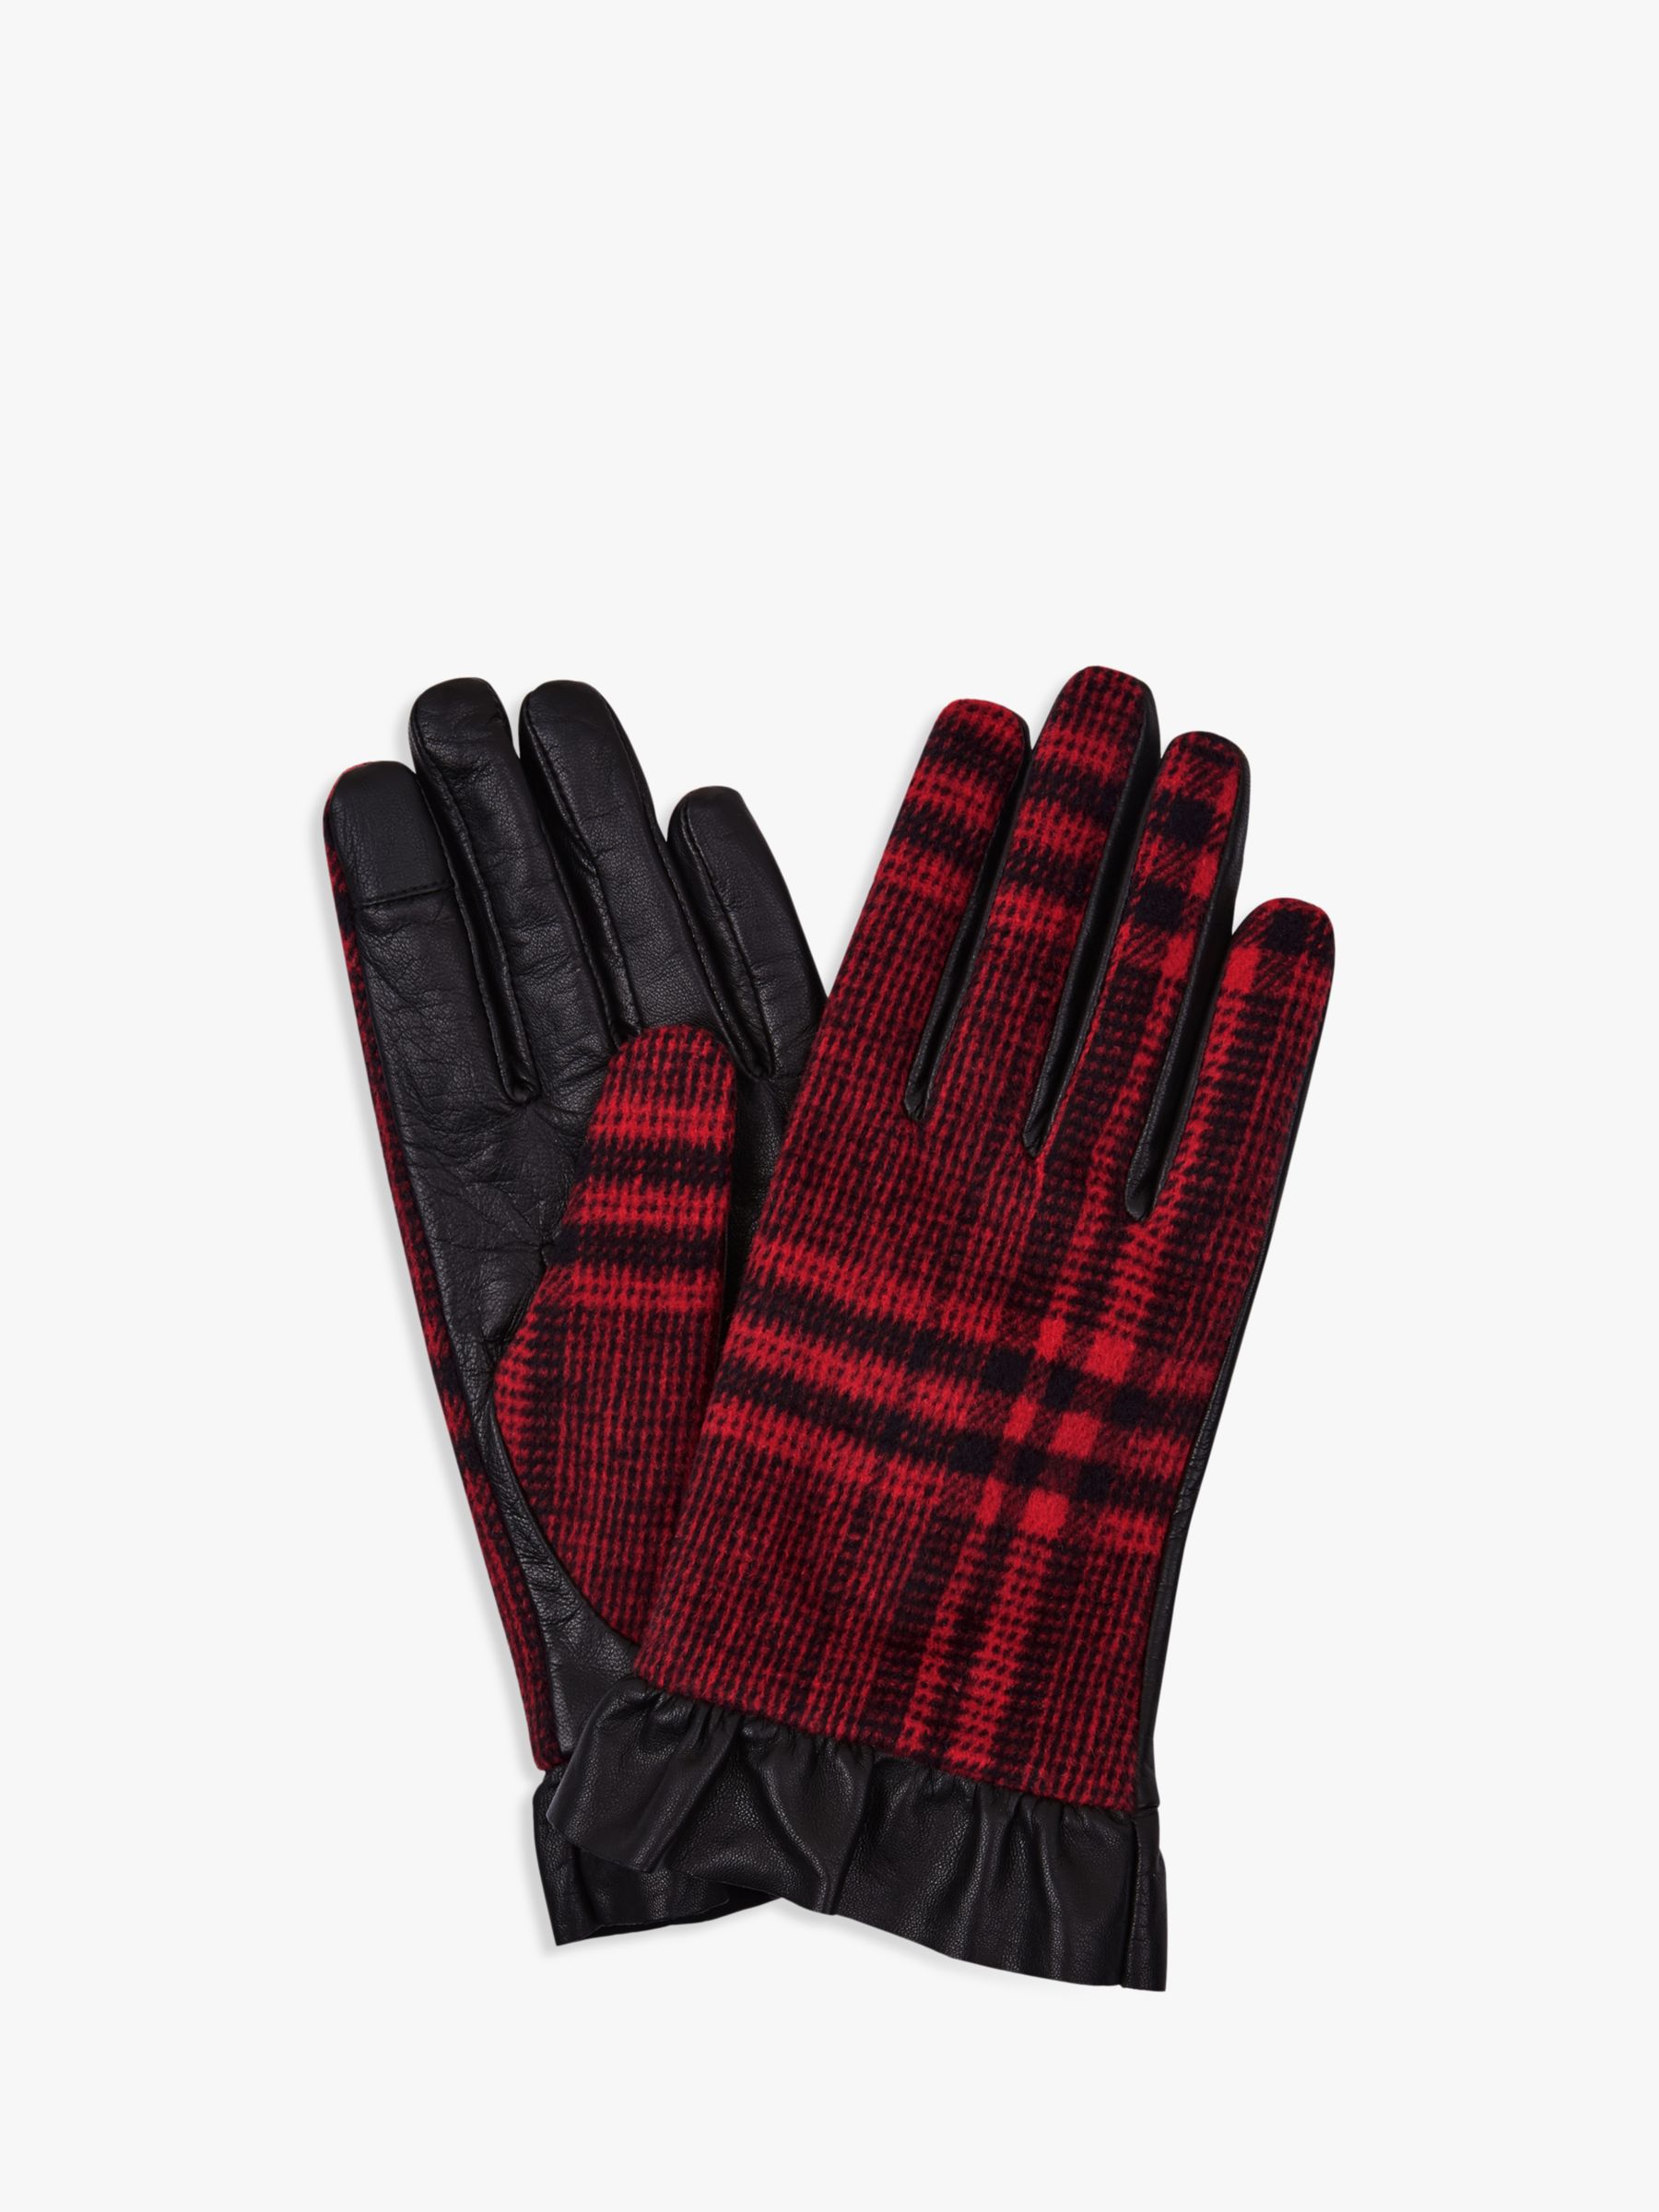 Hobbs Mia Check Leather Gloves, Black Red